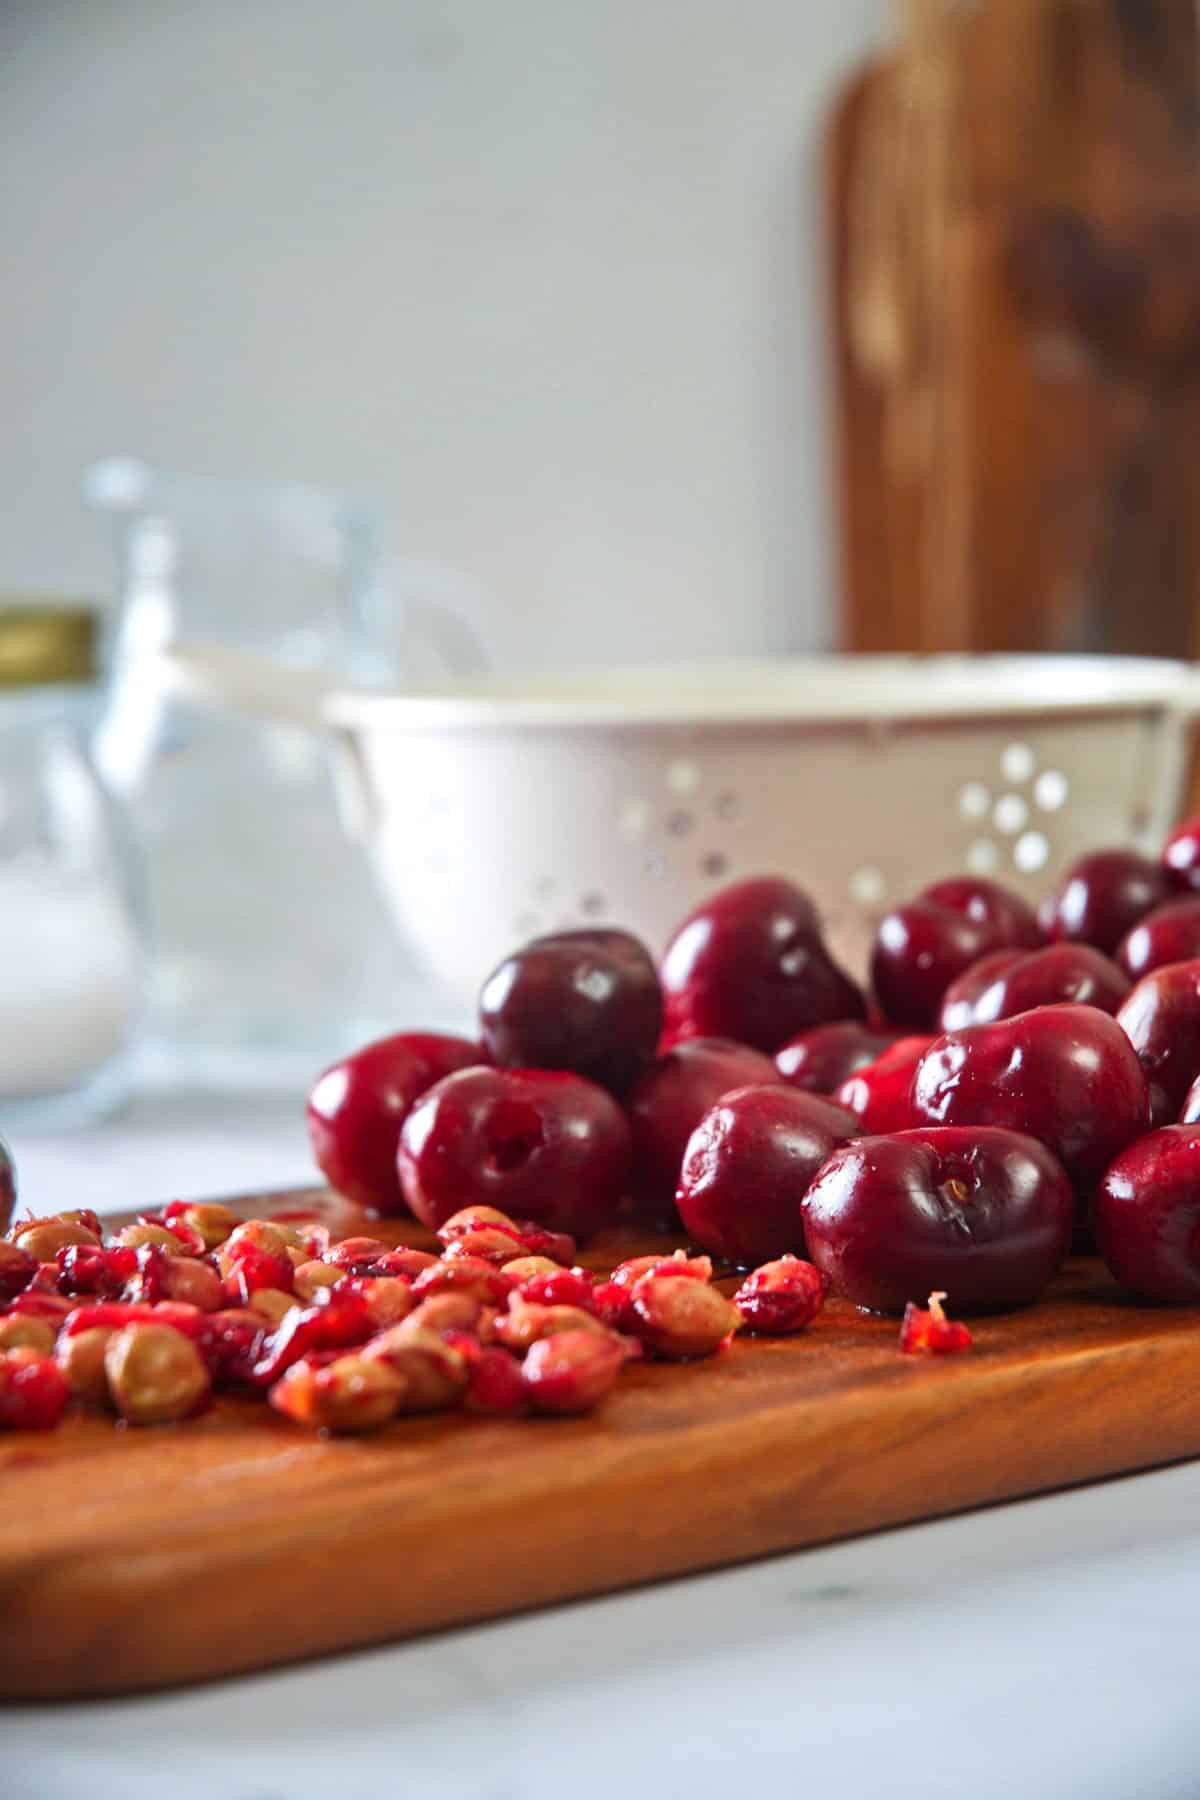 Pitted cherries on wooden board.